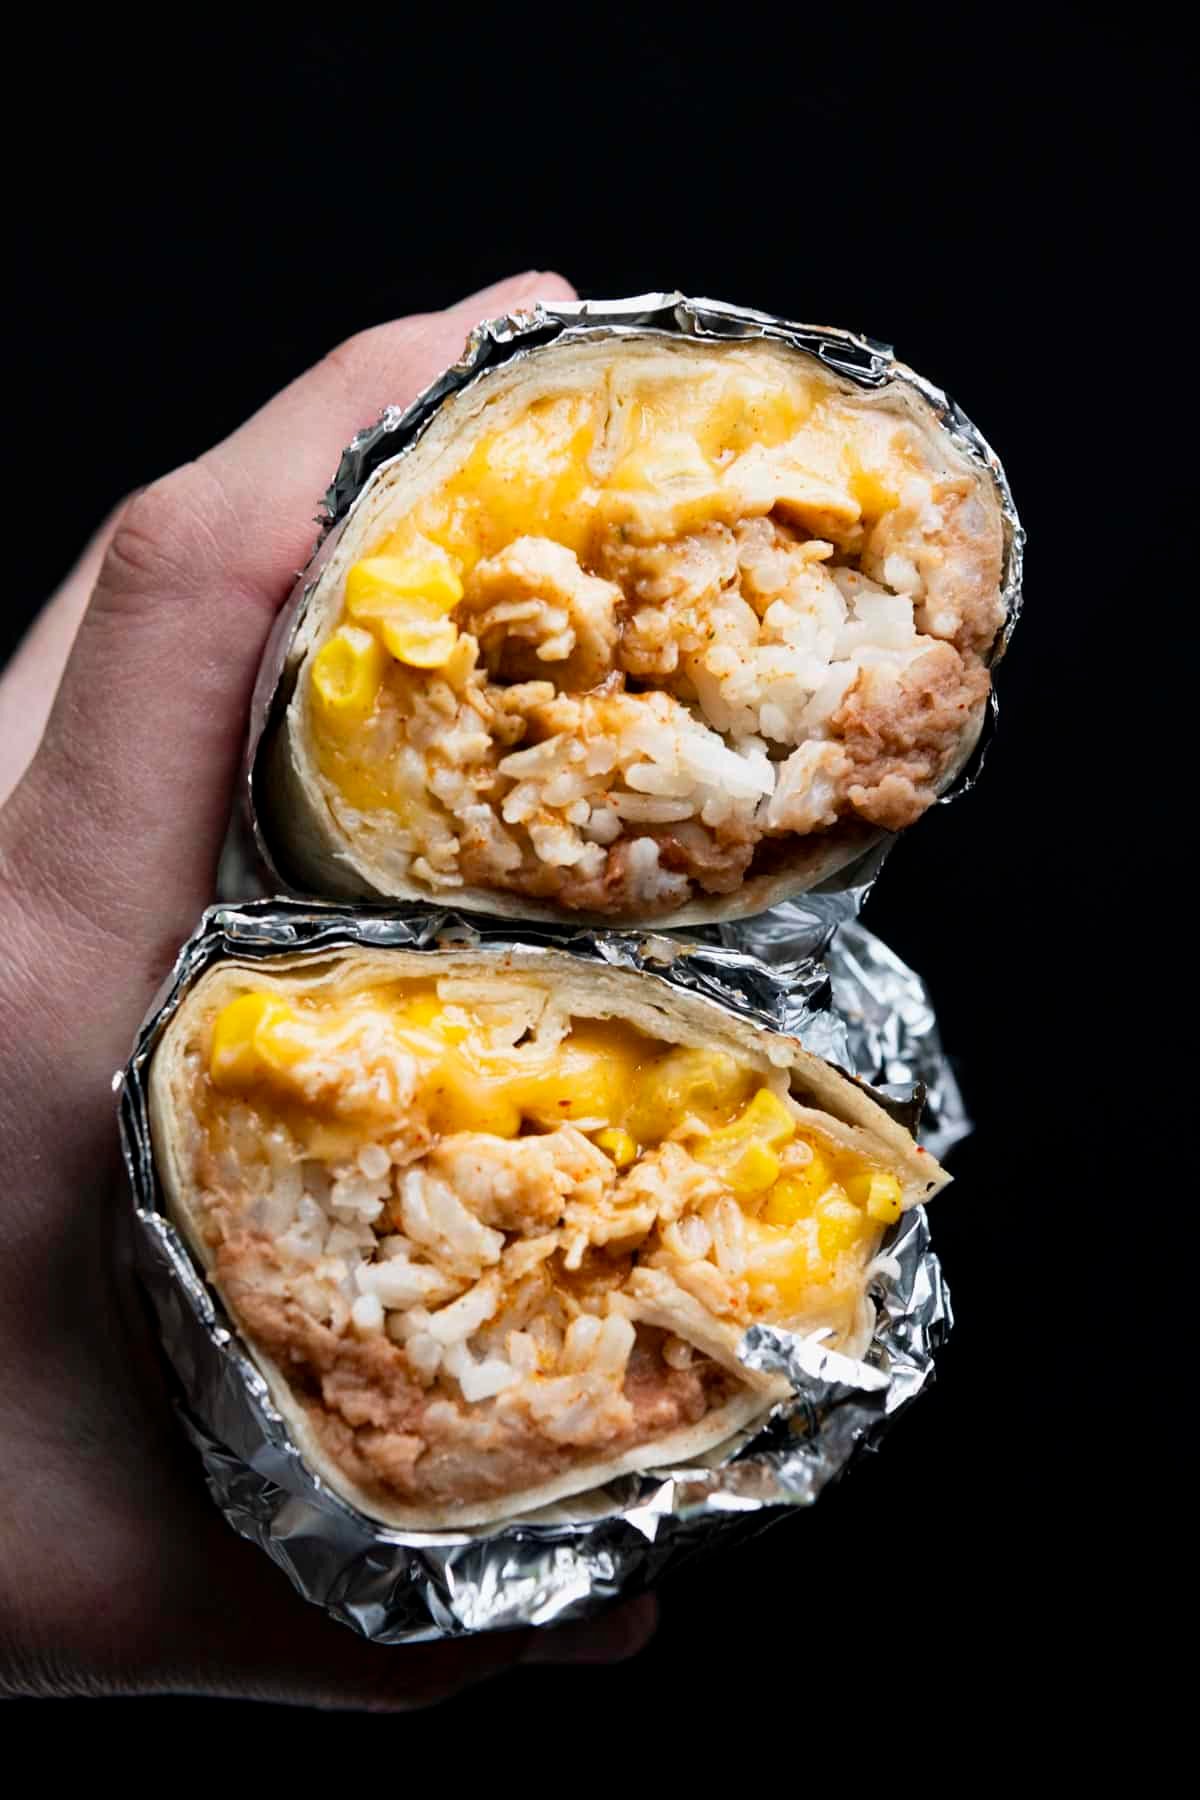 Hands holding a chicken burrito recipe wrapped in foil in front of a black background.